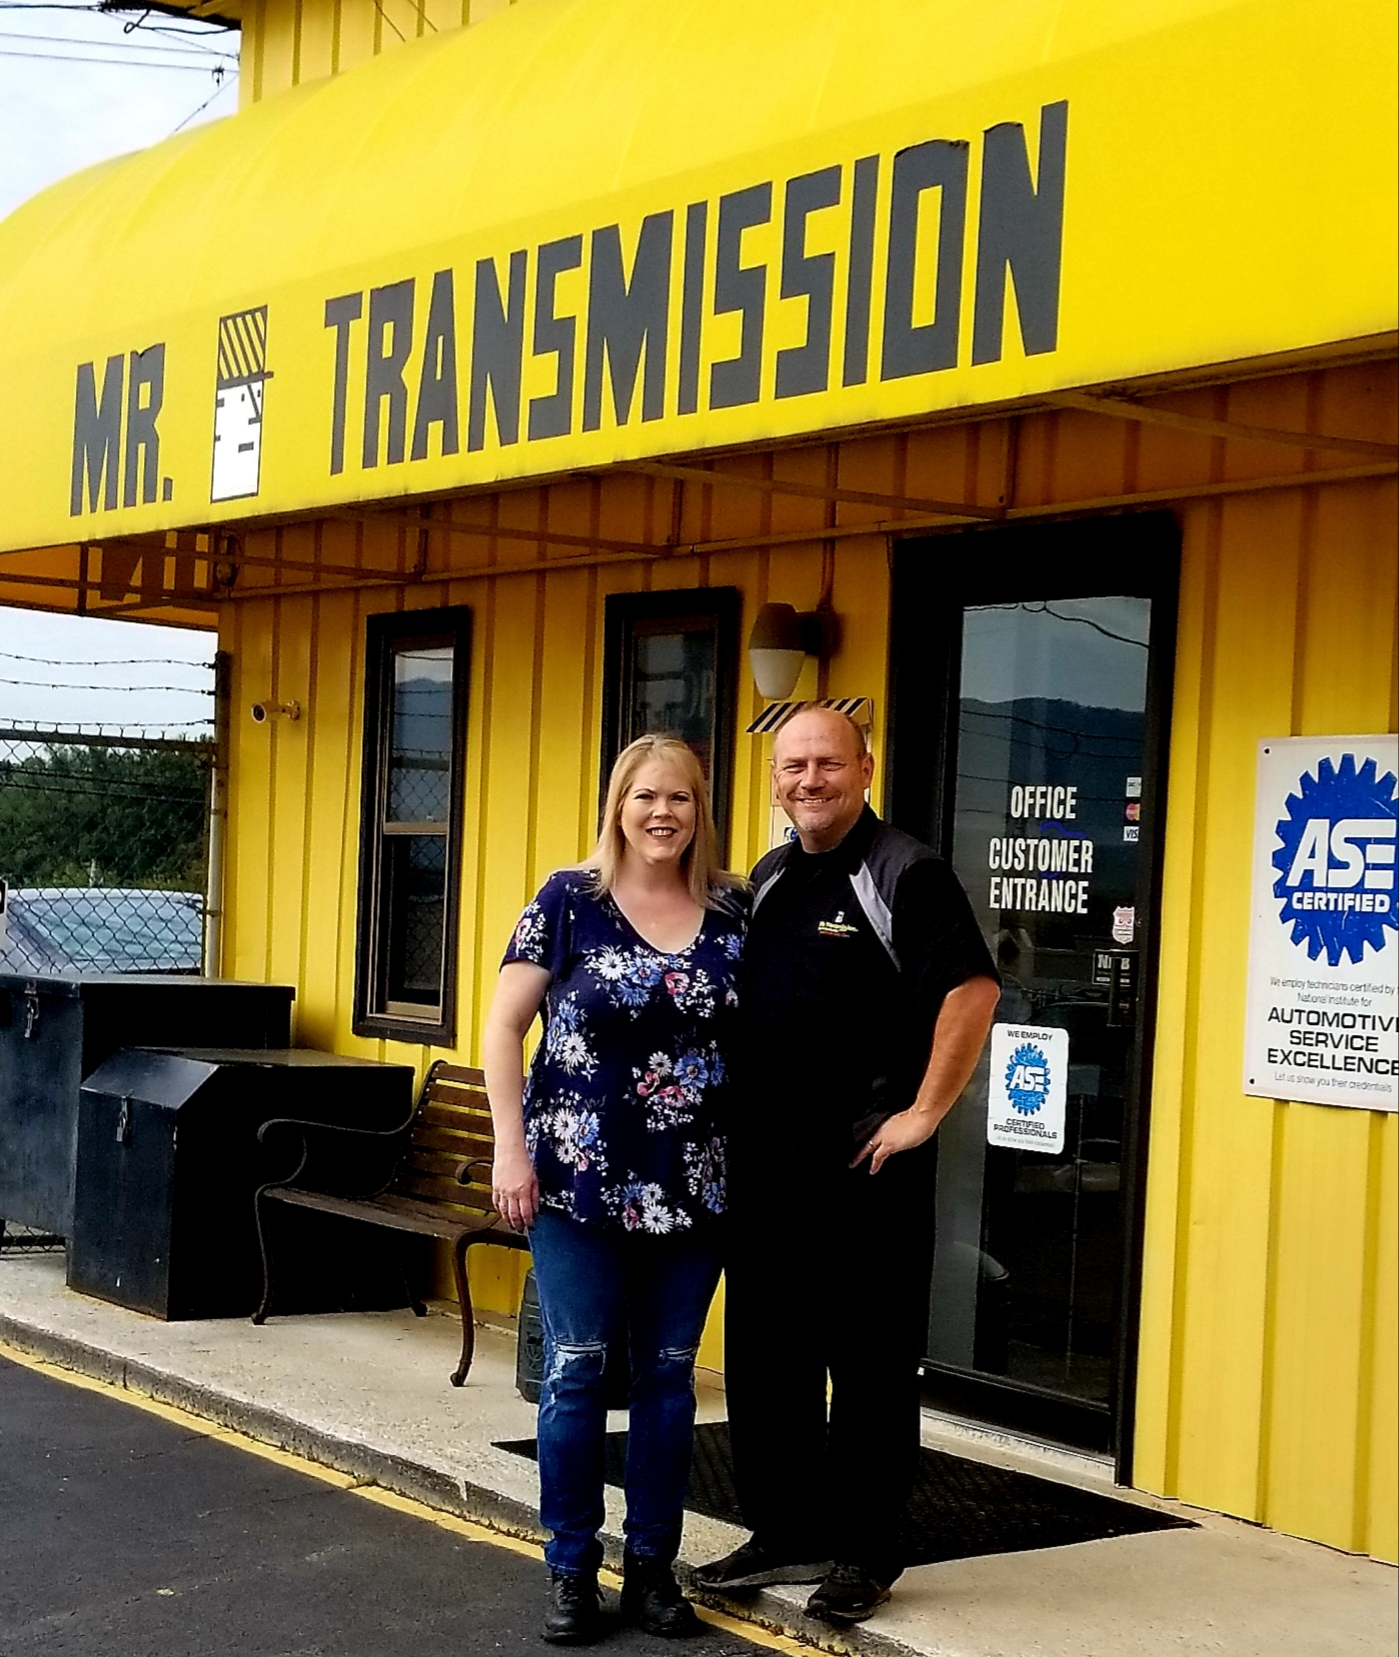 Milex Franchisee of the Year: Tim and Laura Rodifer